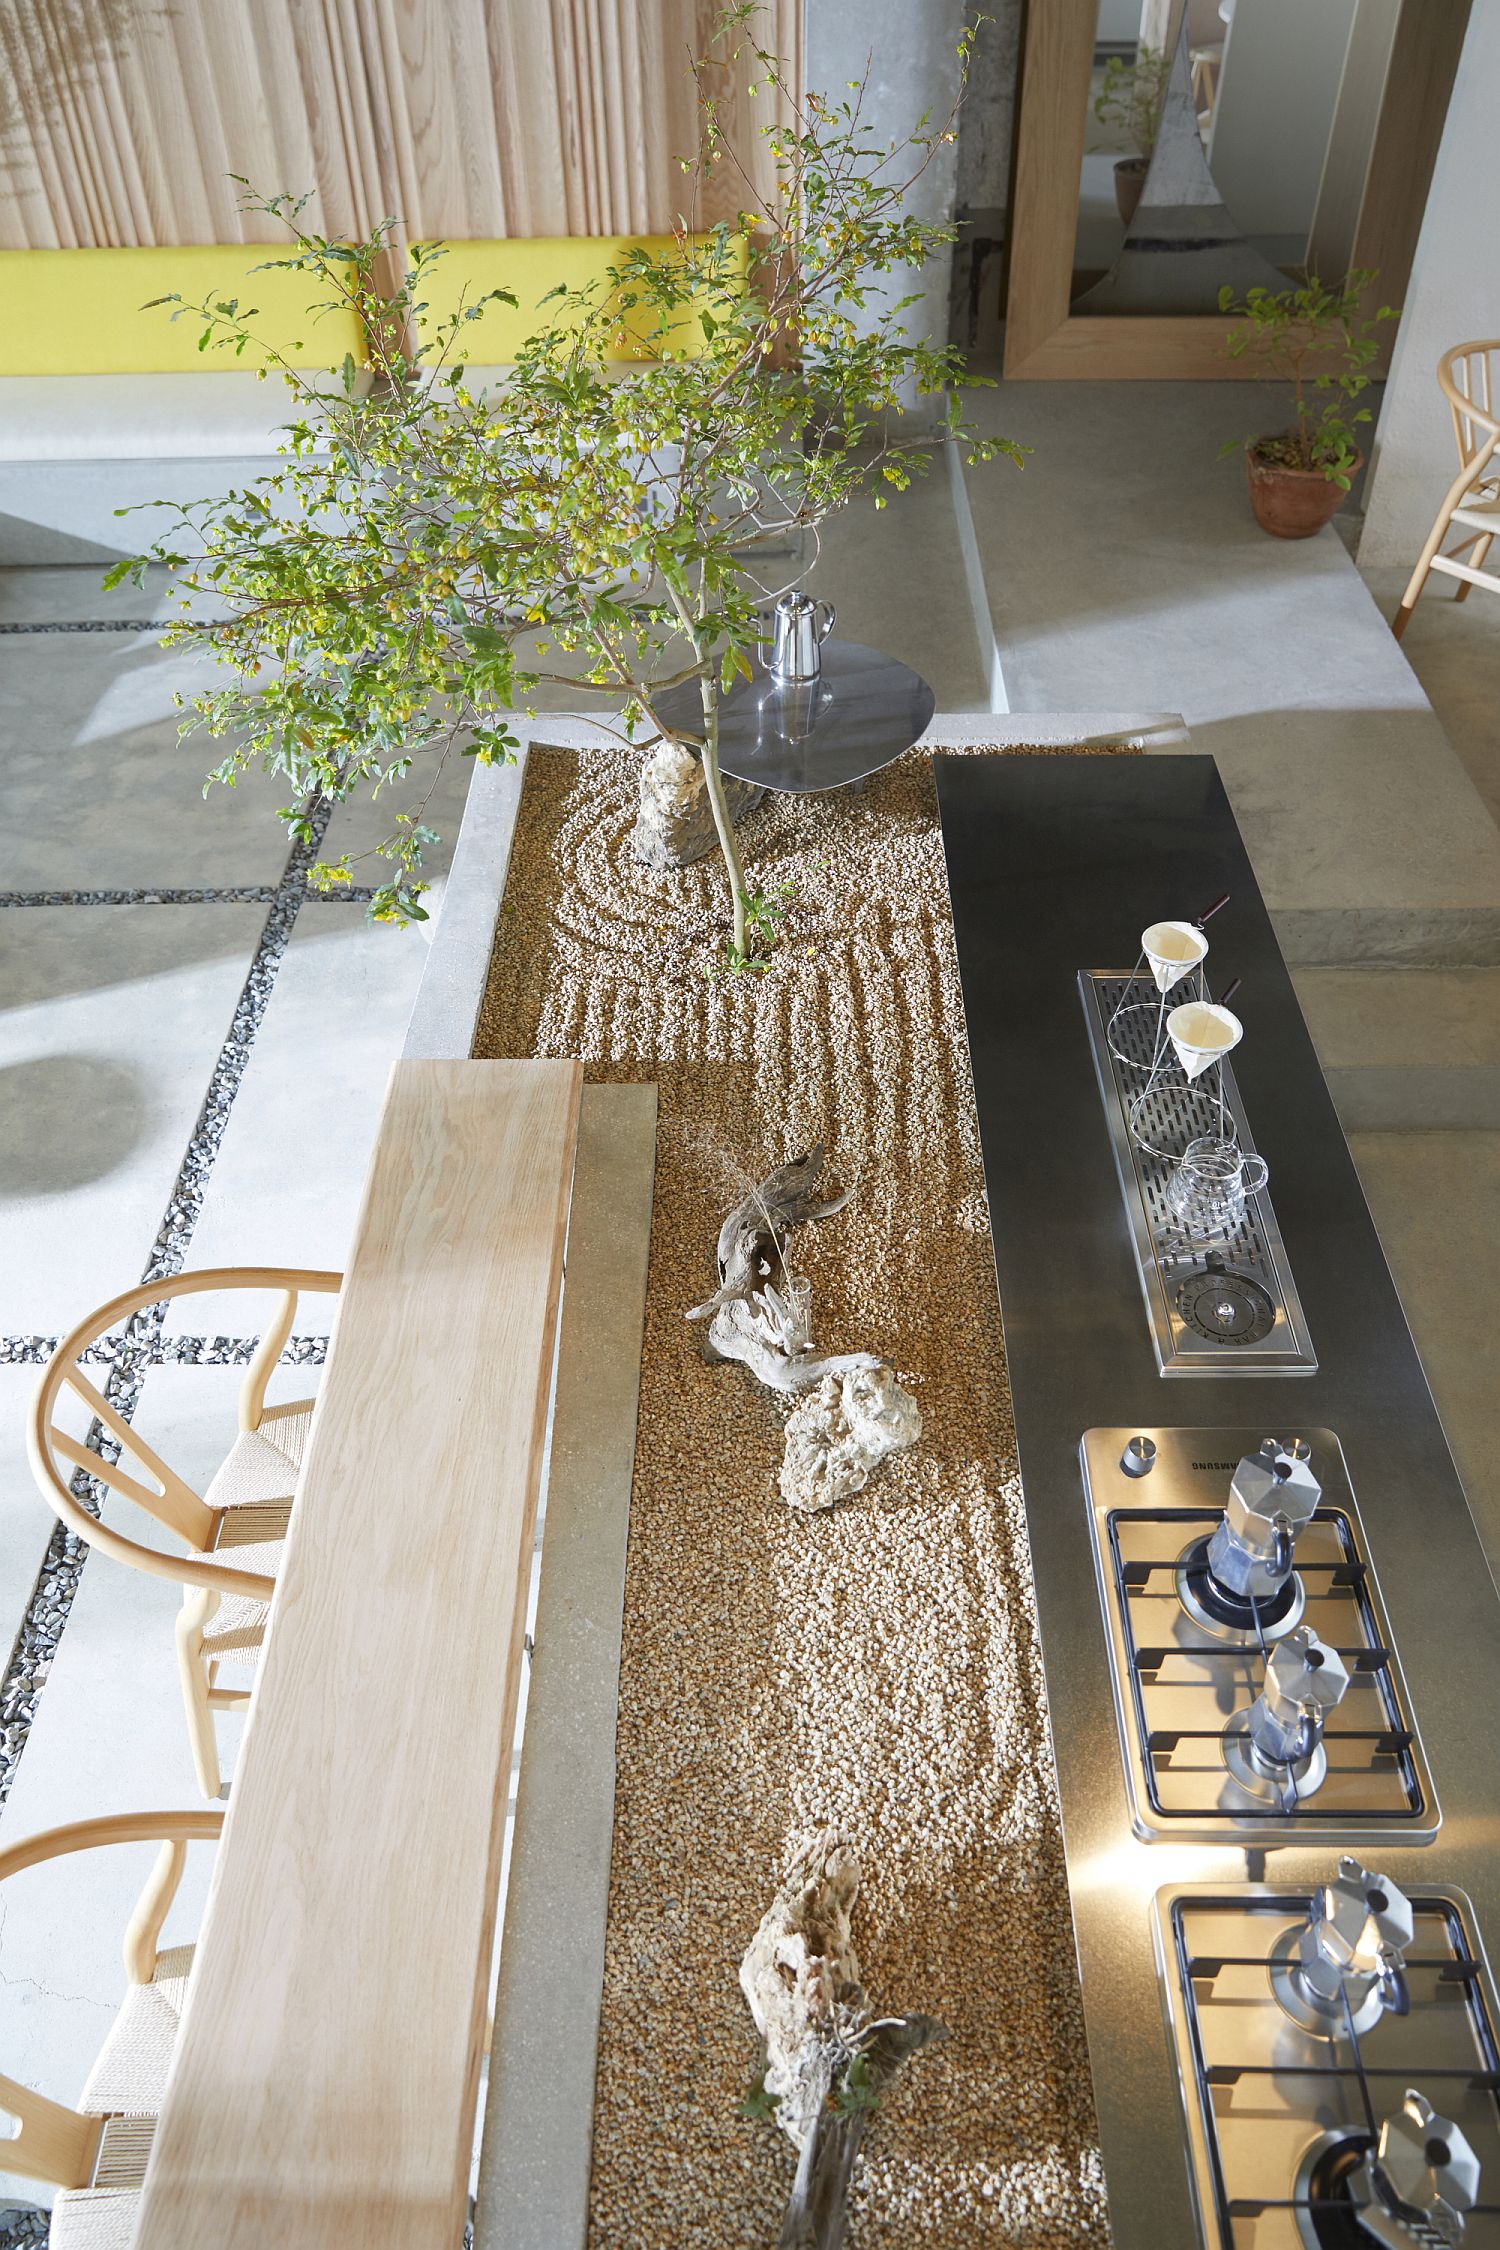 Gravel-filled-central-area-along-with-greenery-inside-the-house